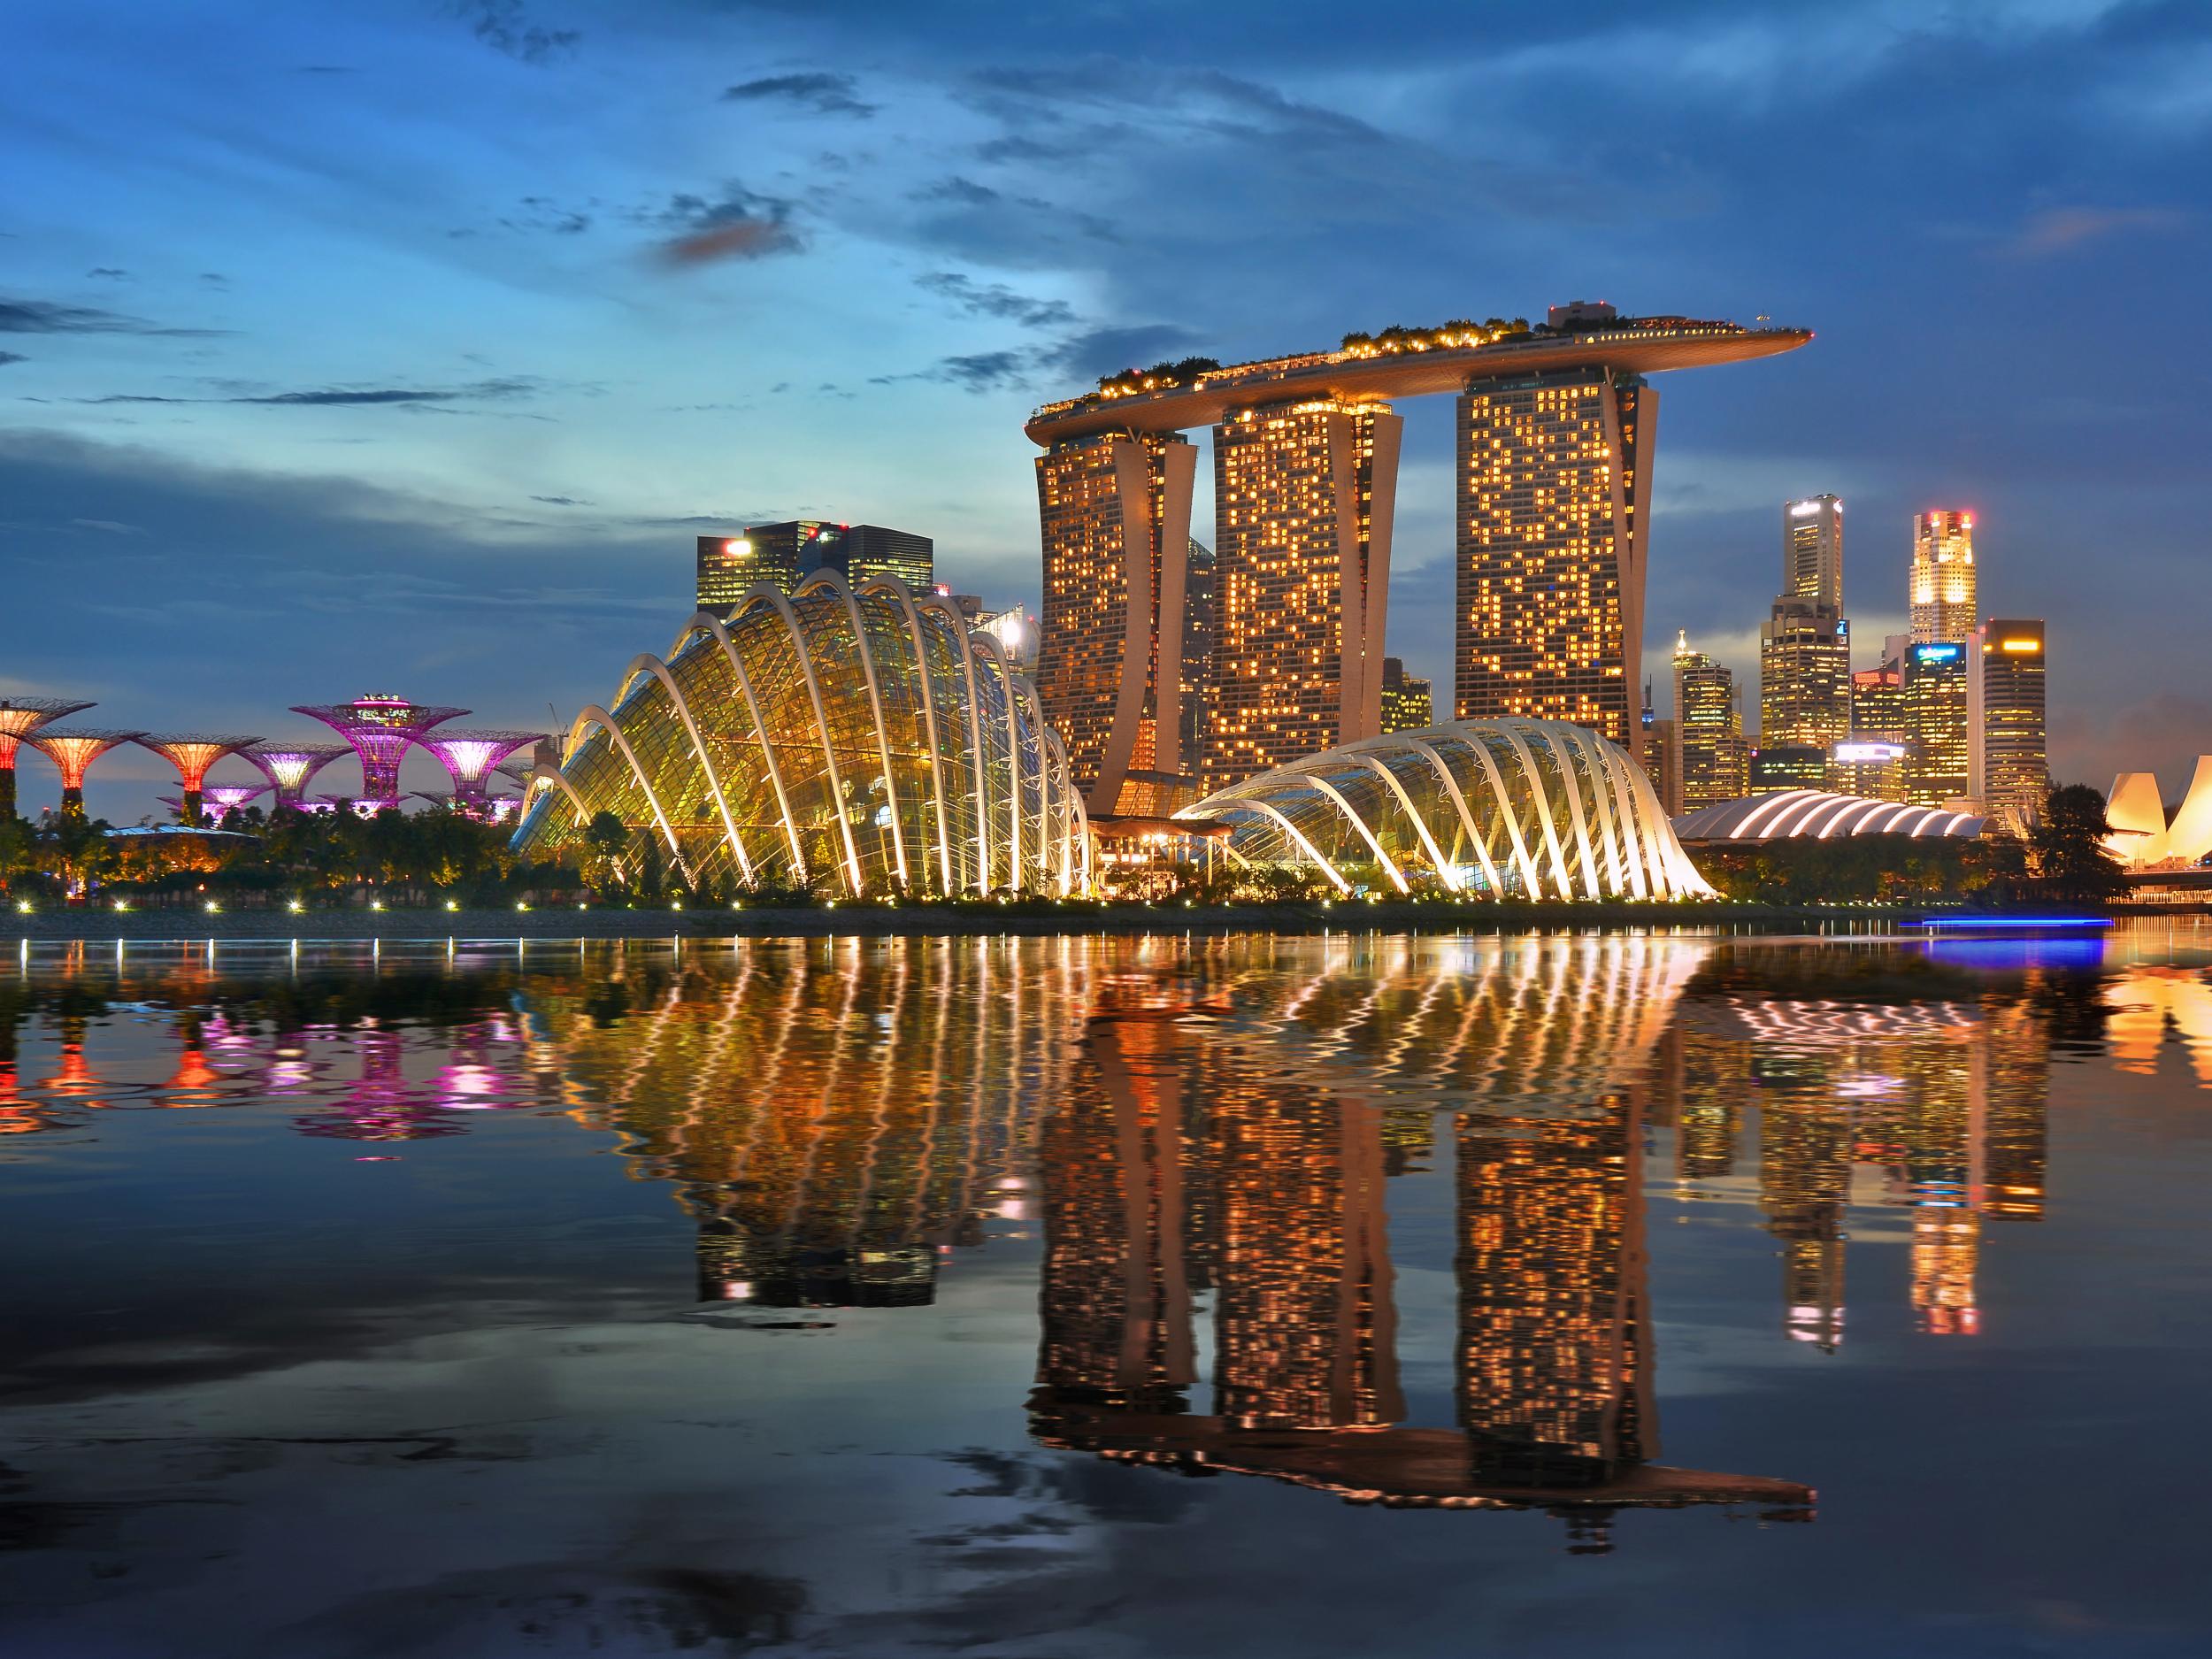 Singapore has topped the list for the fifth year in a row